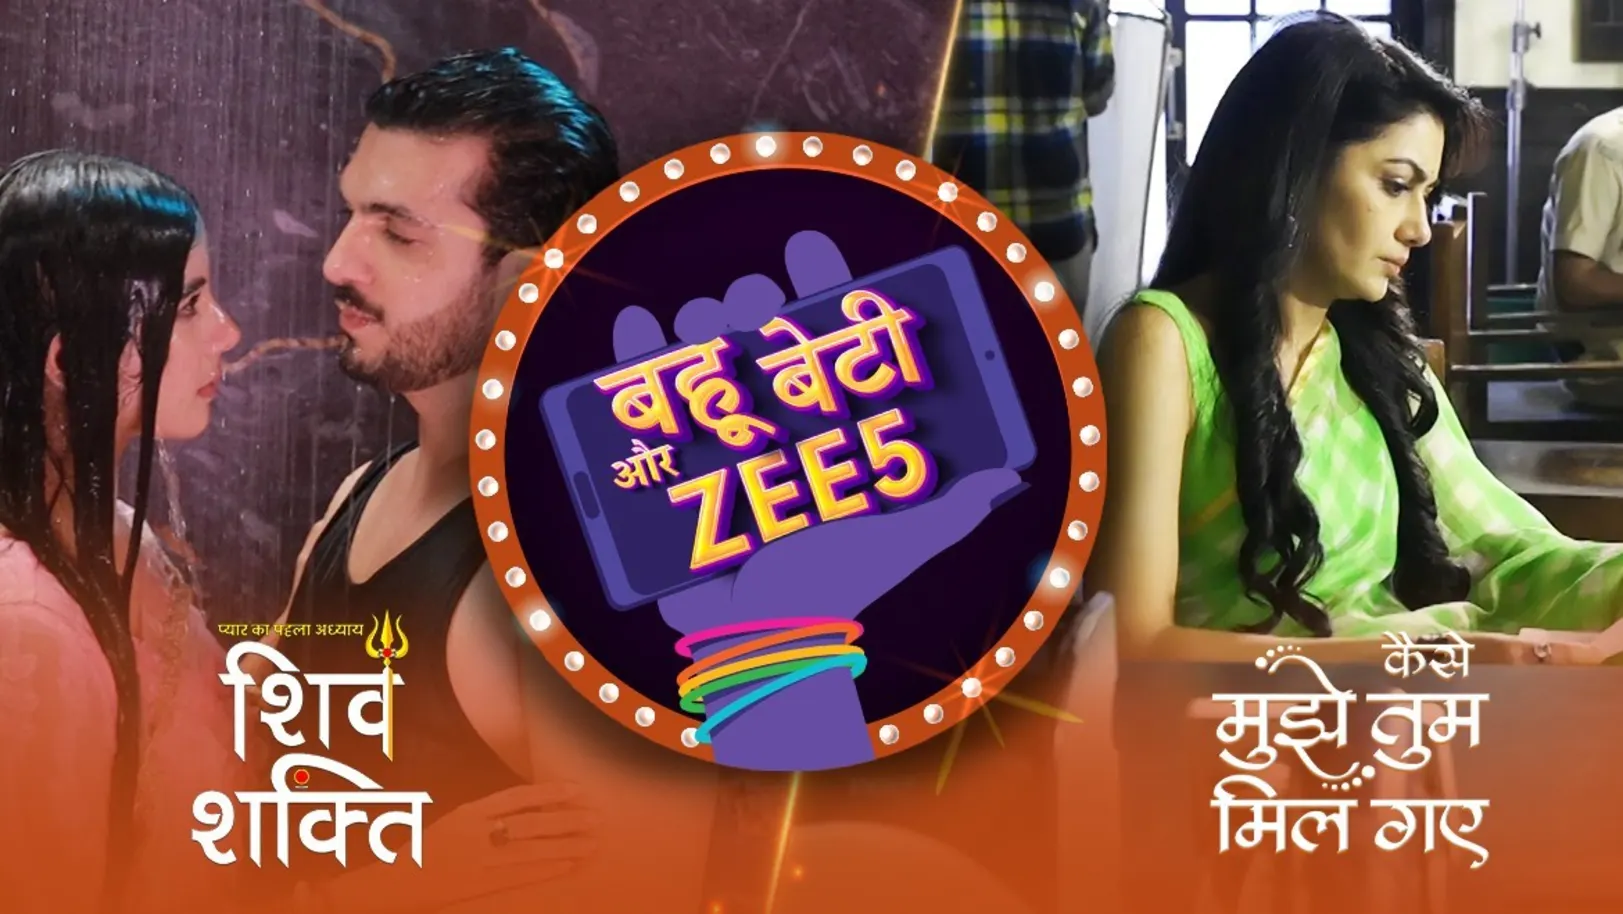 Exciting Scenes of Some Popular Zee TV Shows | Behind the Scenes | Bahu Beti Aur ZEE5 Episode 3